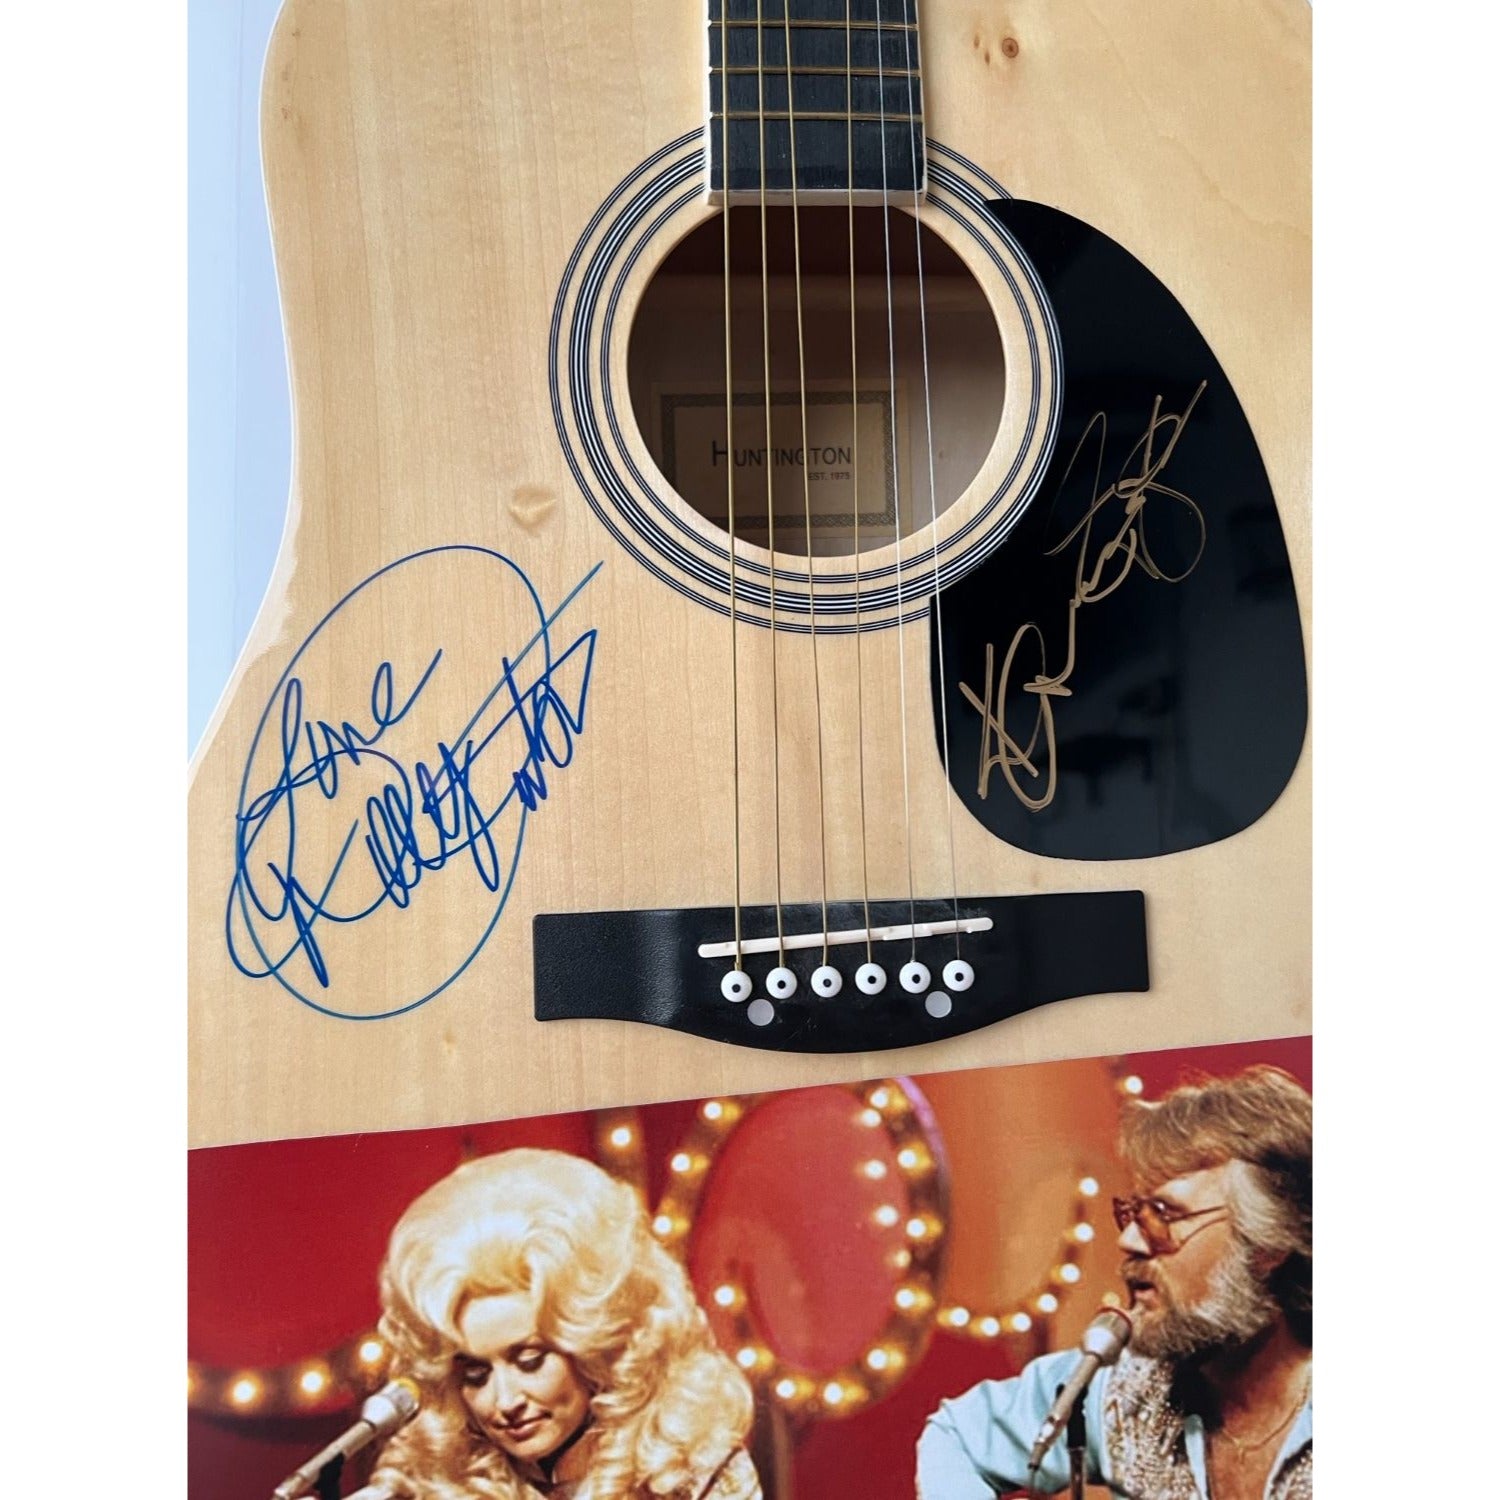 Dolly Parton and Kenny Rogers One of a Kind guitar signed with proof